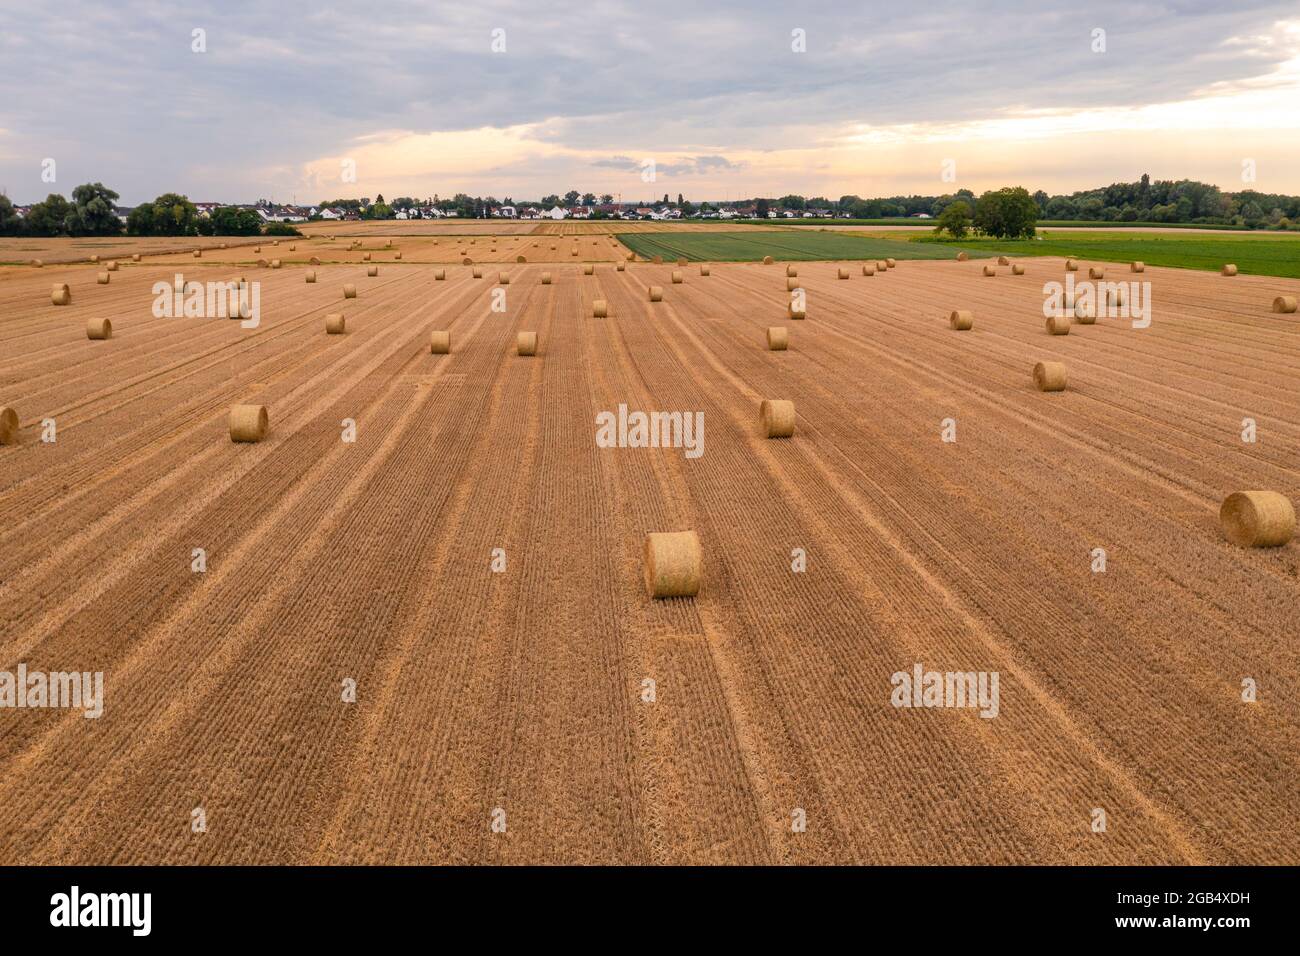 A field with hay bales after the harvest with a view of further fields and a village in backlight Stock Photo